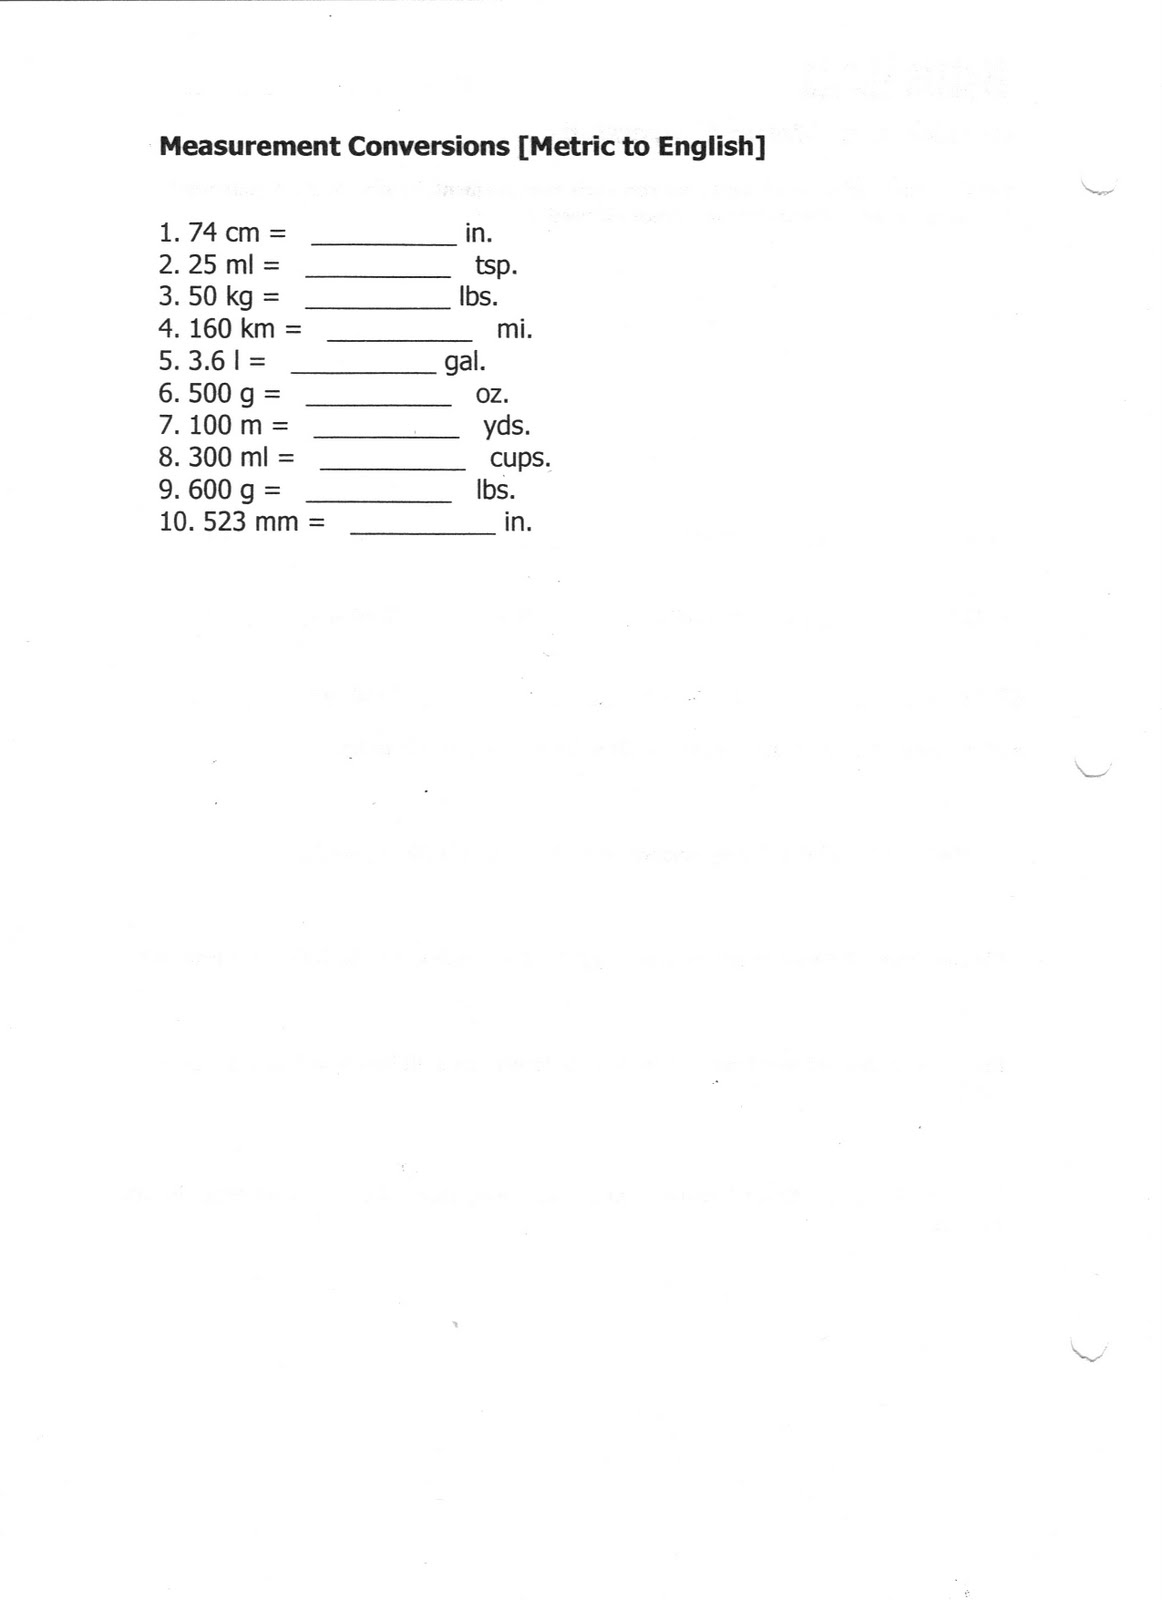 ms-friedman-s-foundations-of-science-metric-english-conversion-worksheet